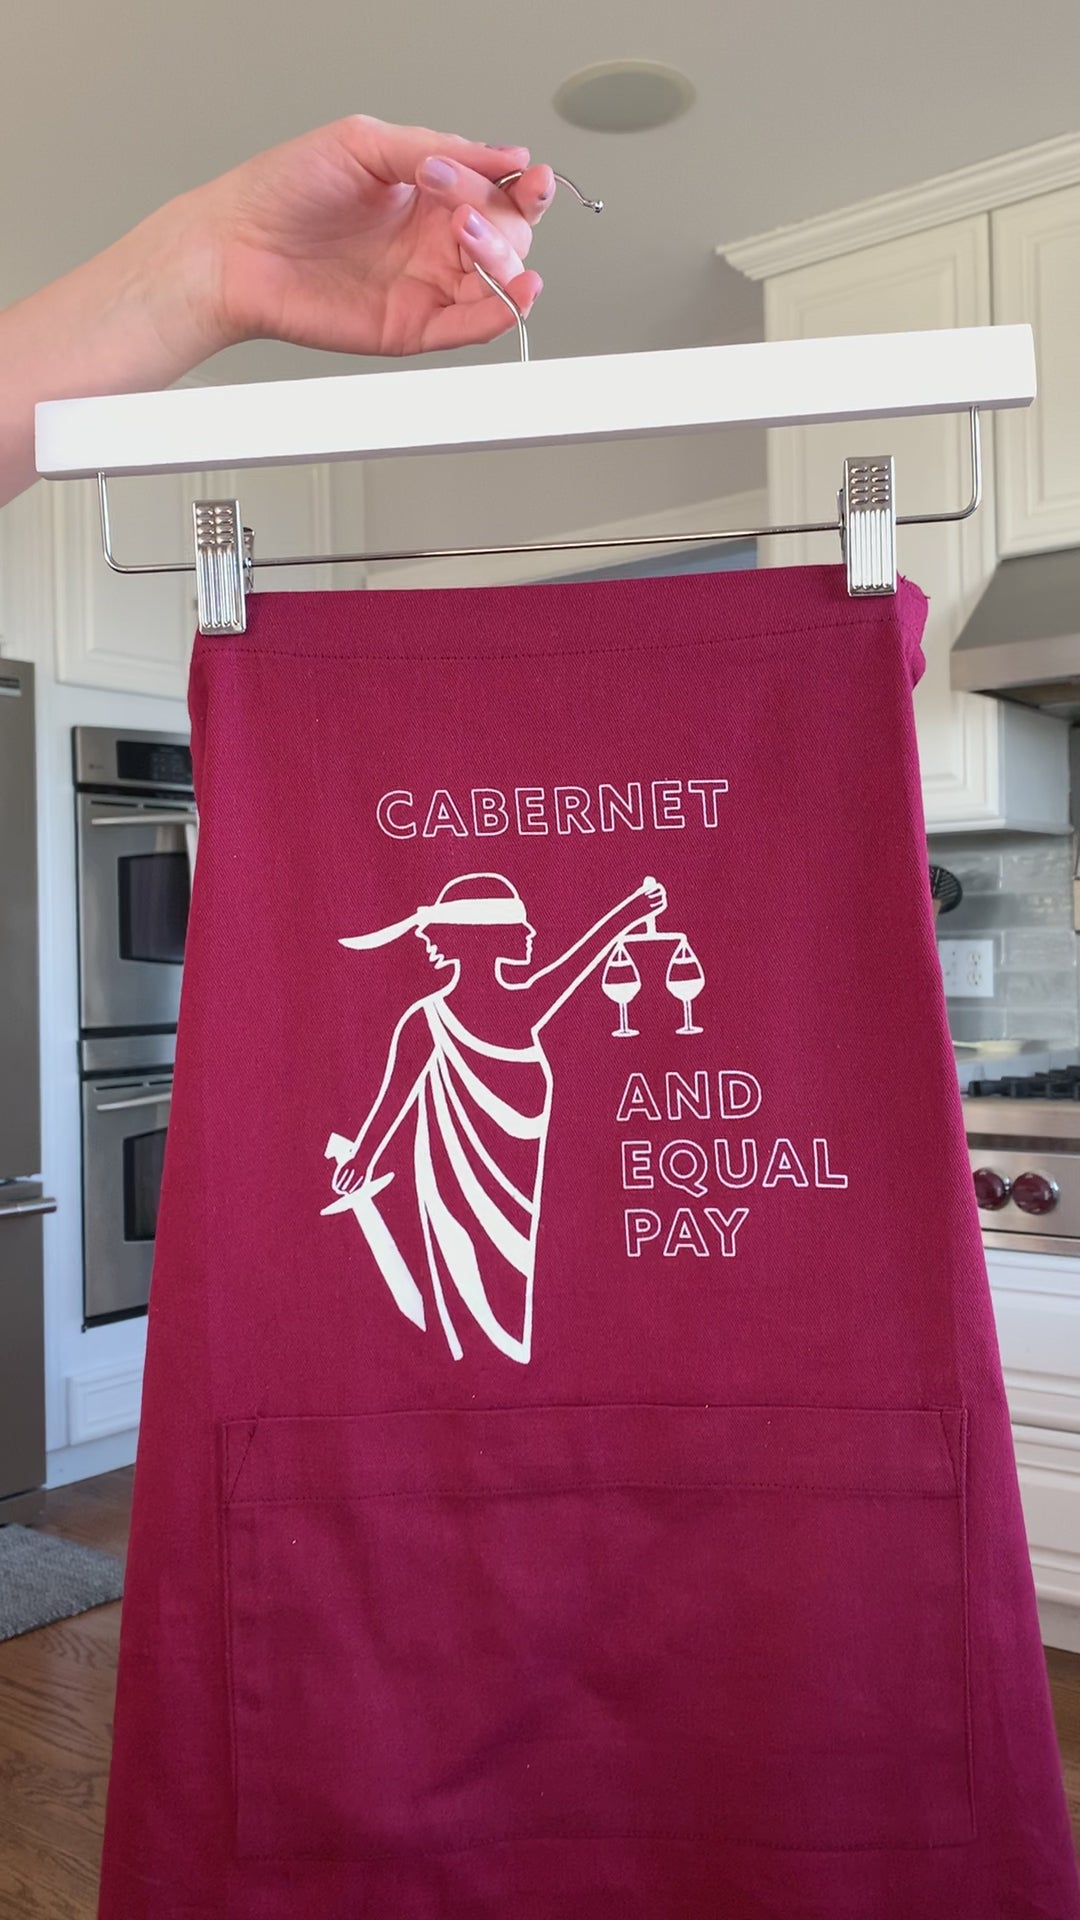 A red apron that reads "Cabernet and Equal Pay" hangs on a hanger